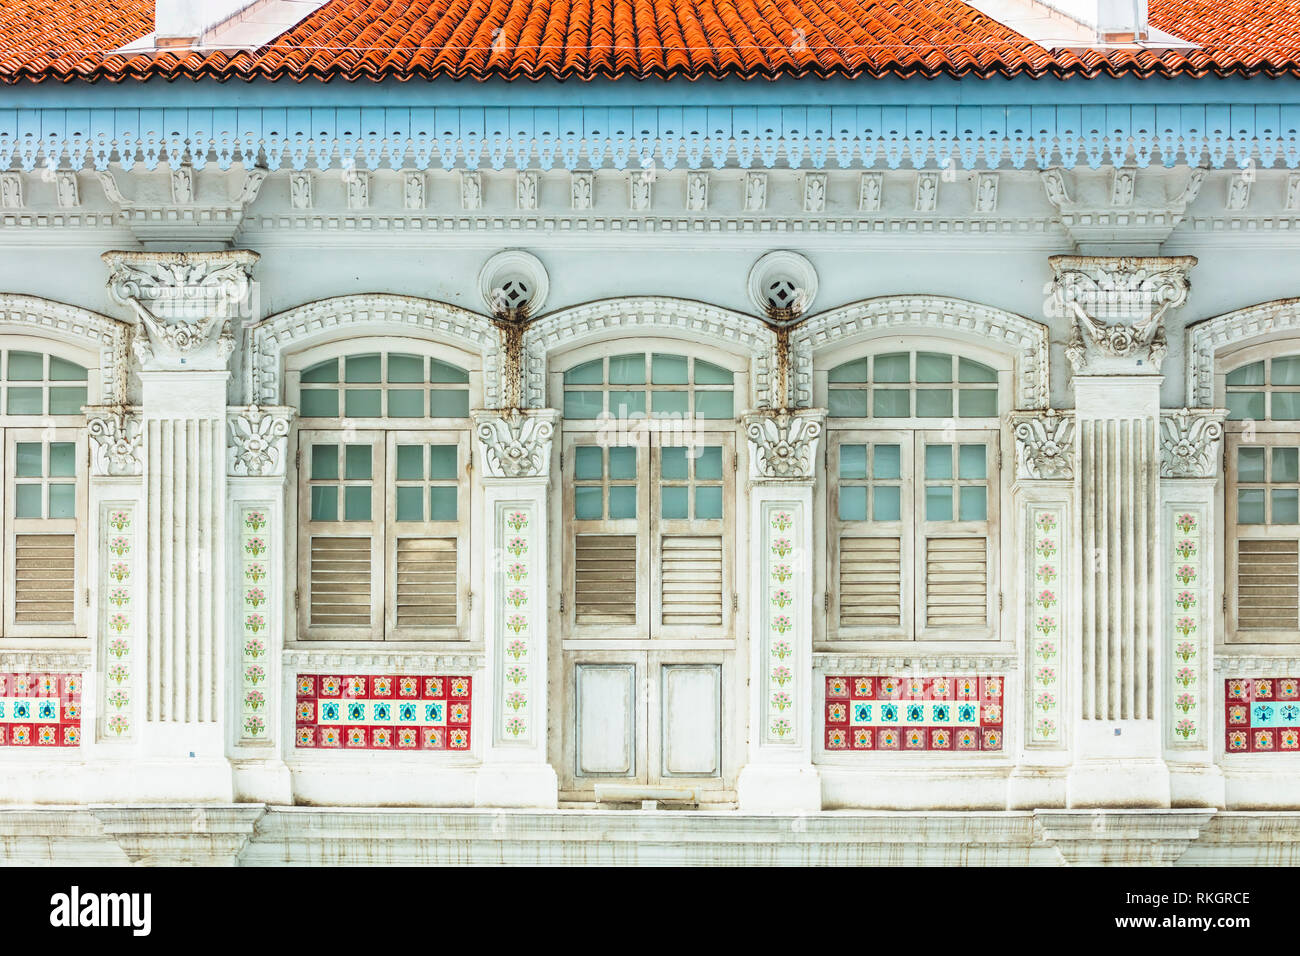 Singapore Little India conservation district, transitional Art Deco shophouse near Jalan Besar, zoom in close up details of architectural facade Stock Photo